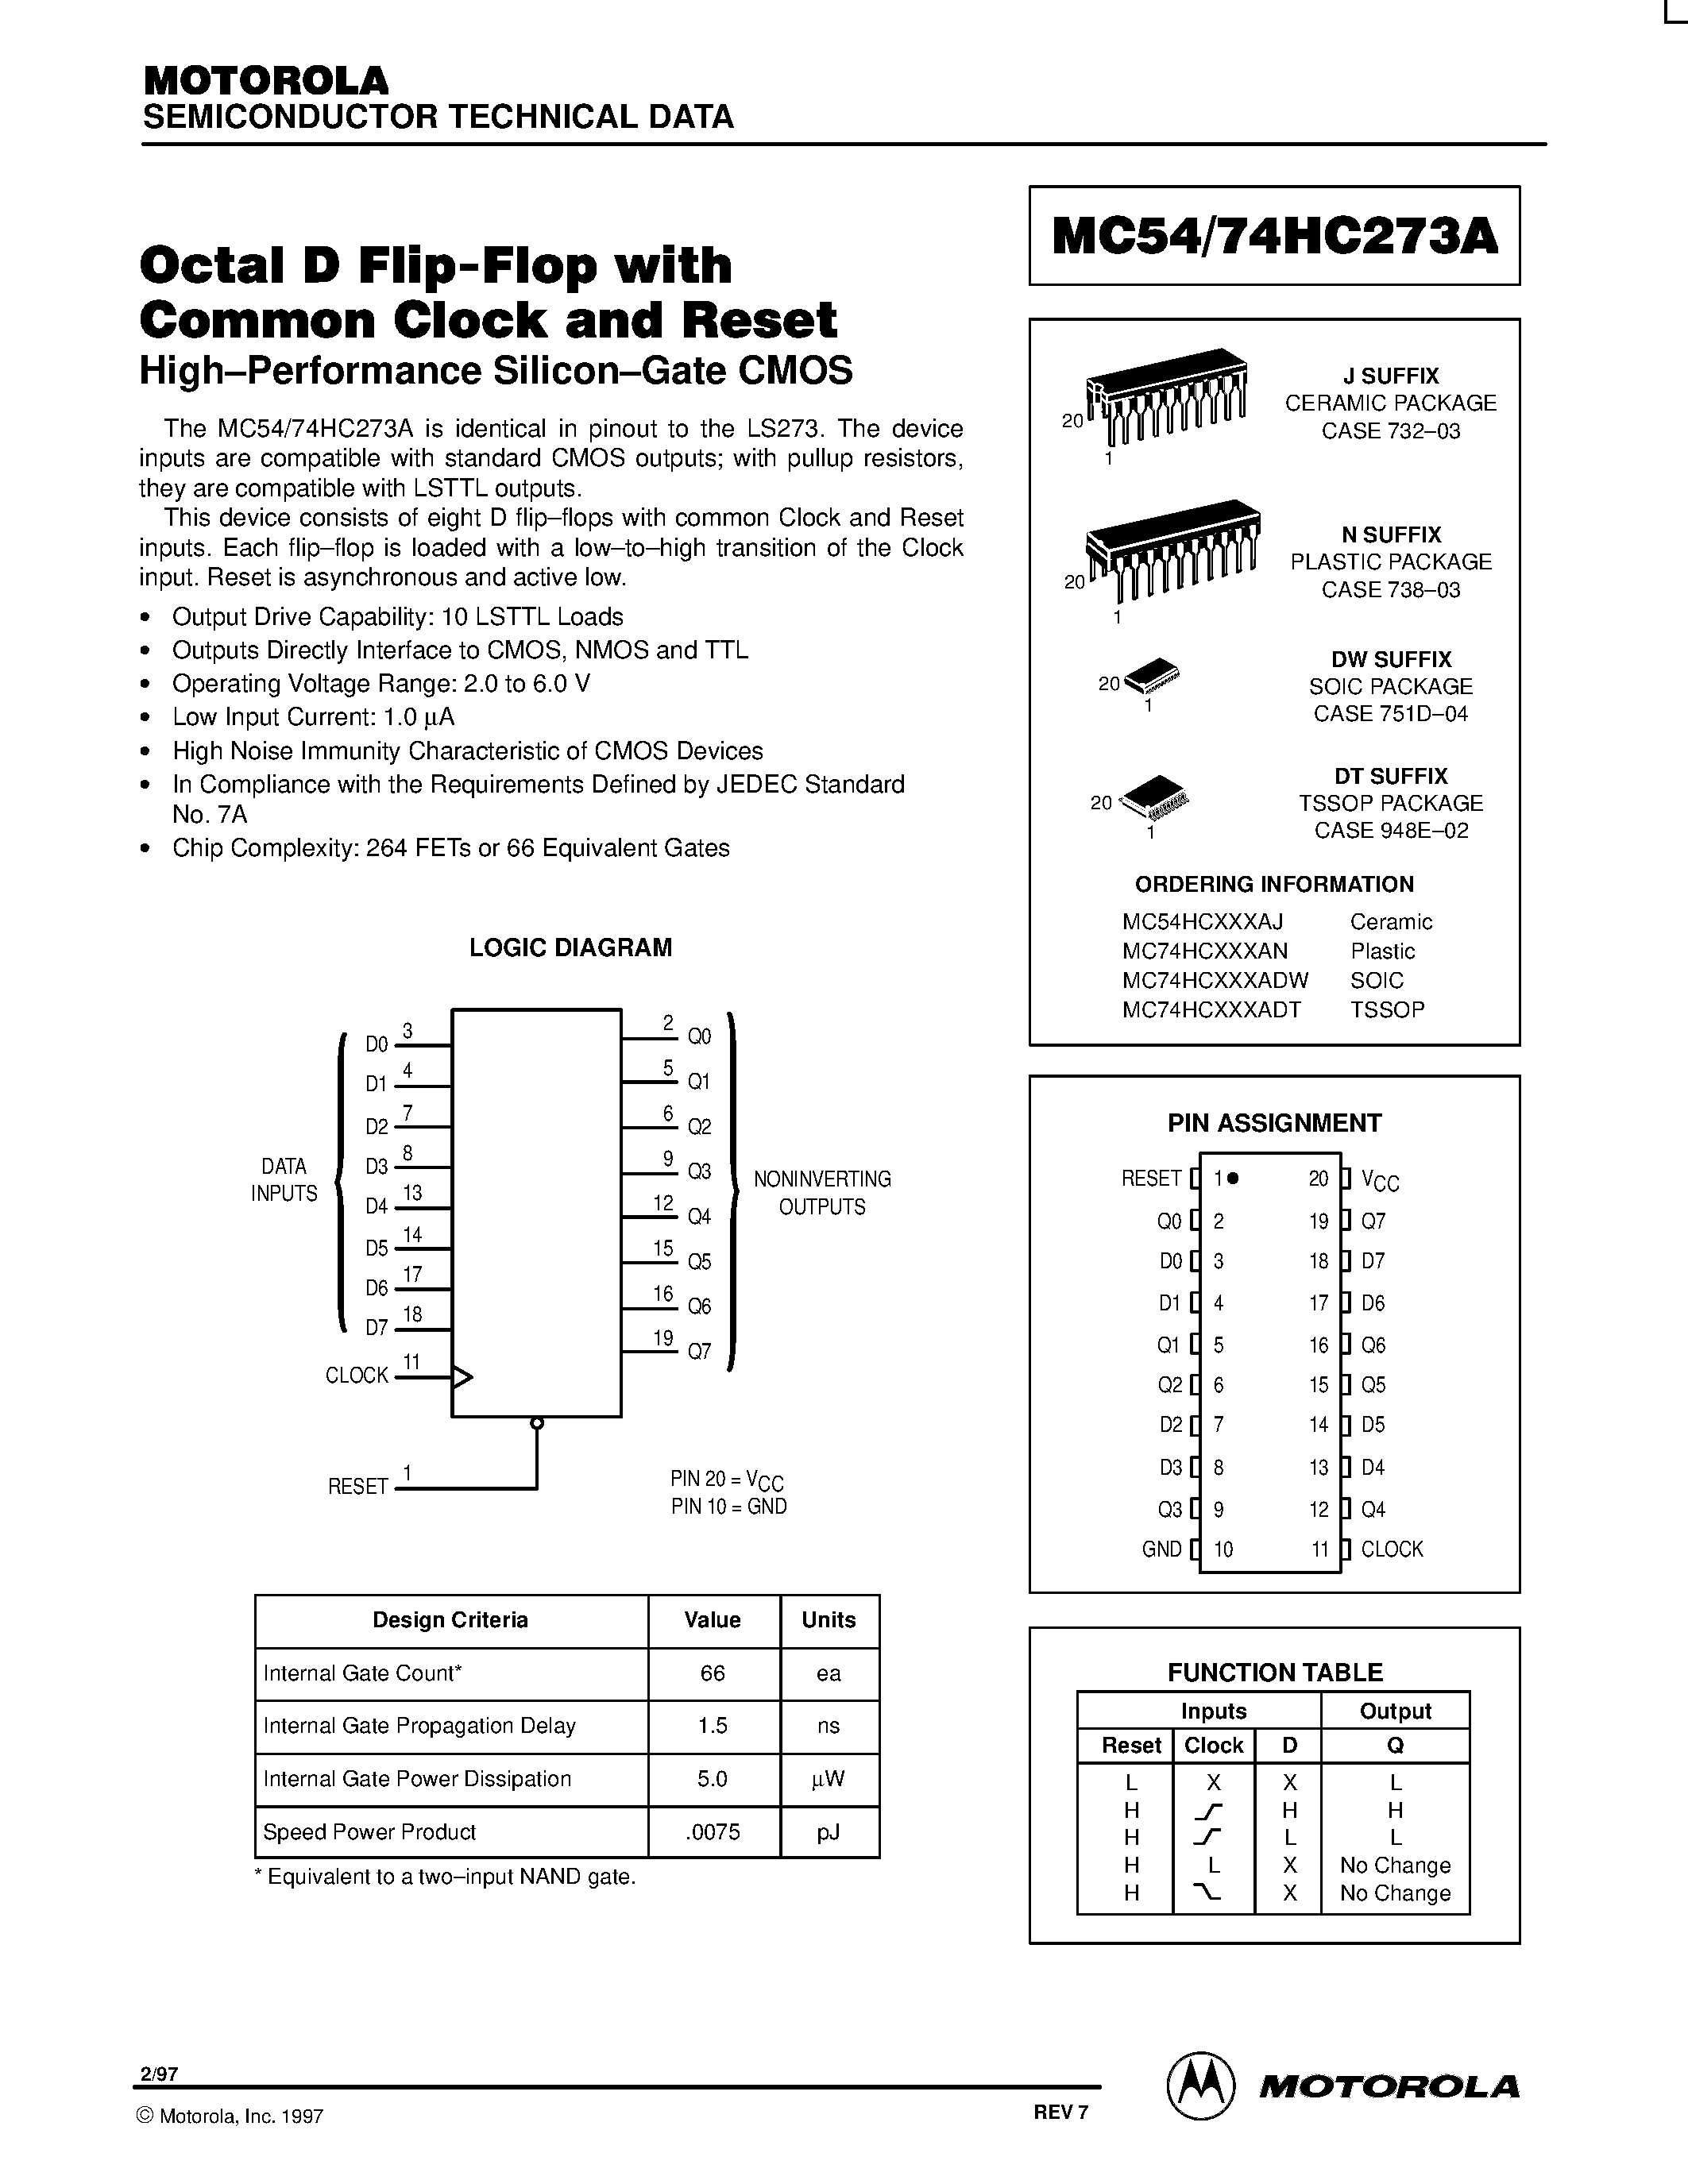 Datasheet MC7HC273A - Octal D Flip-Flop with Common Clock and Reset page 1